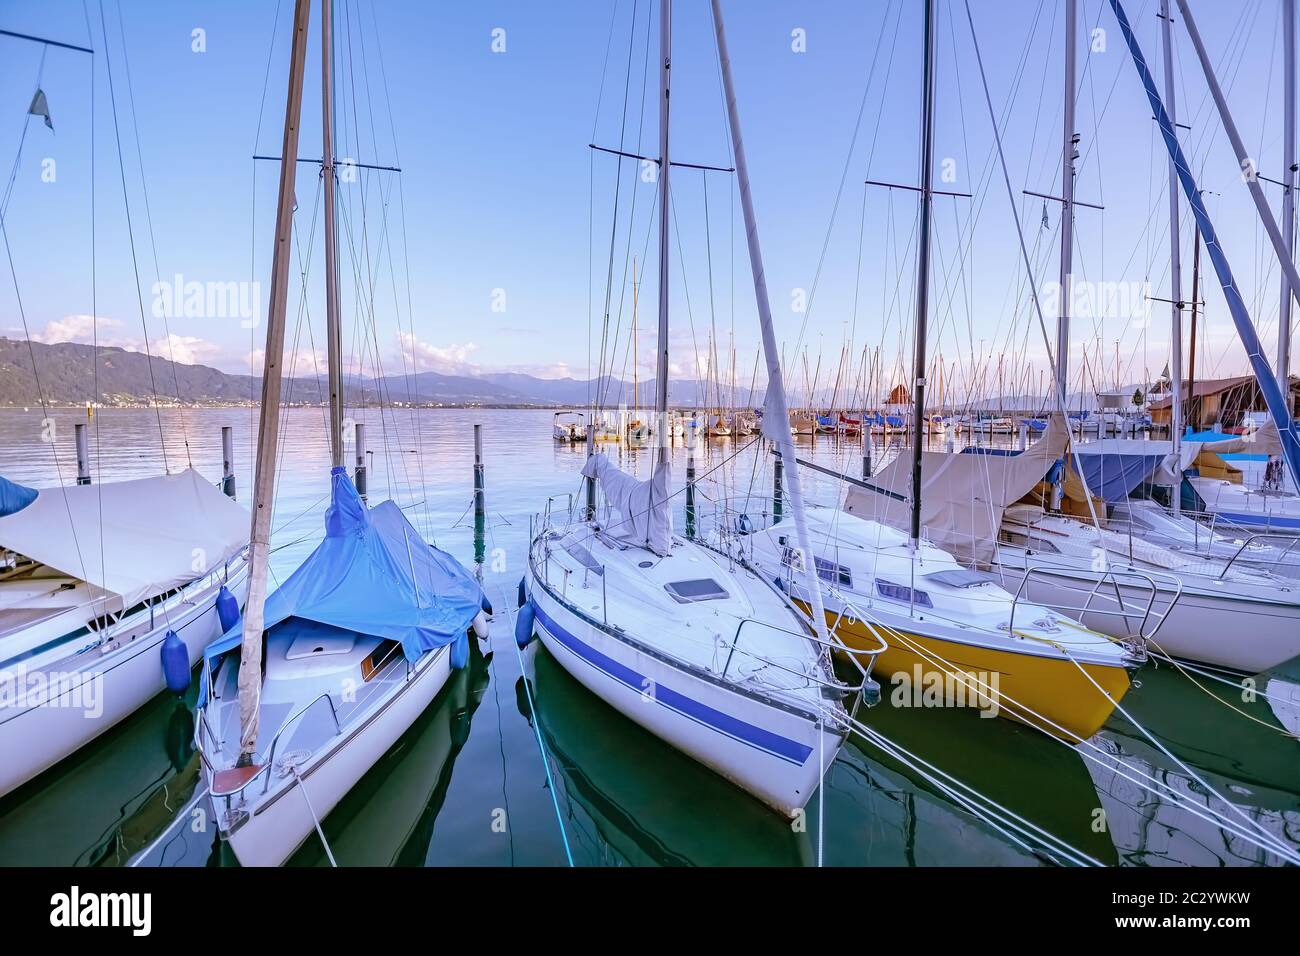 Moored yachts on Bodensee Stock Photo